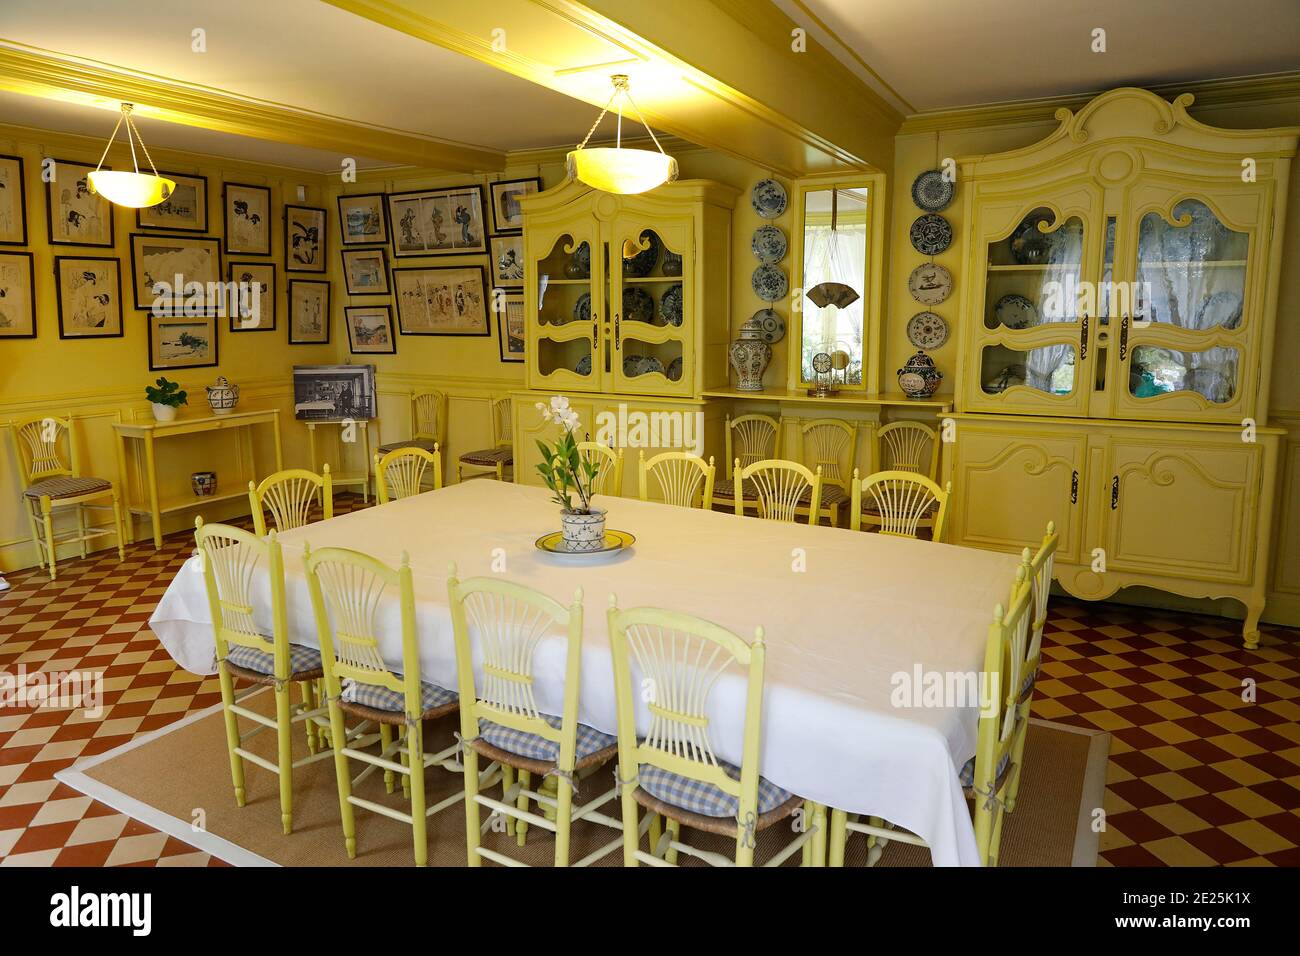 Claude Monet's house in Giverny, France. Dining room. Stock Photo